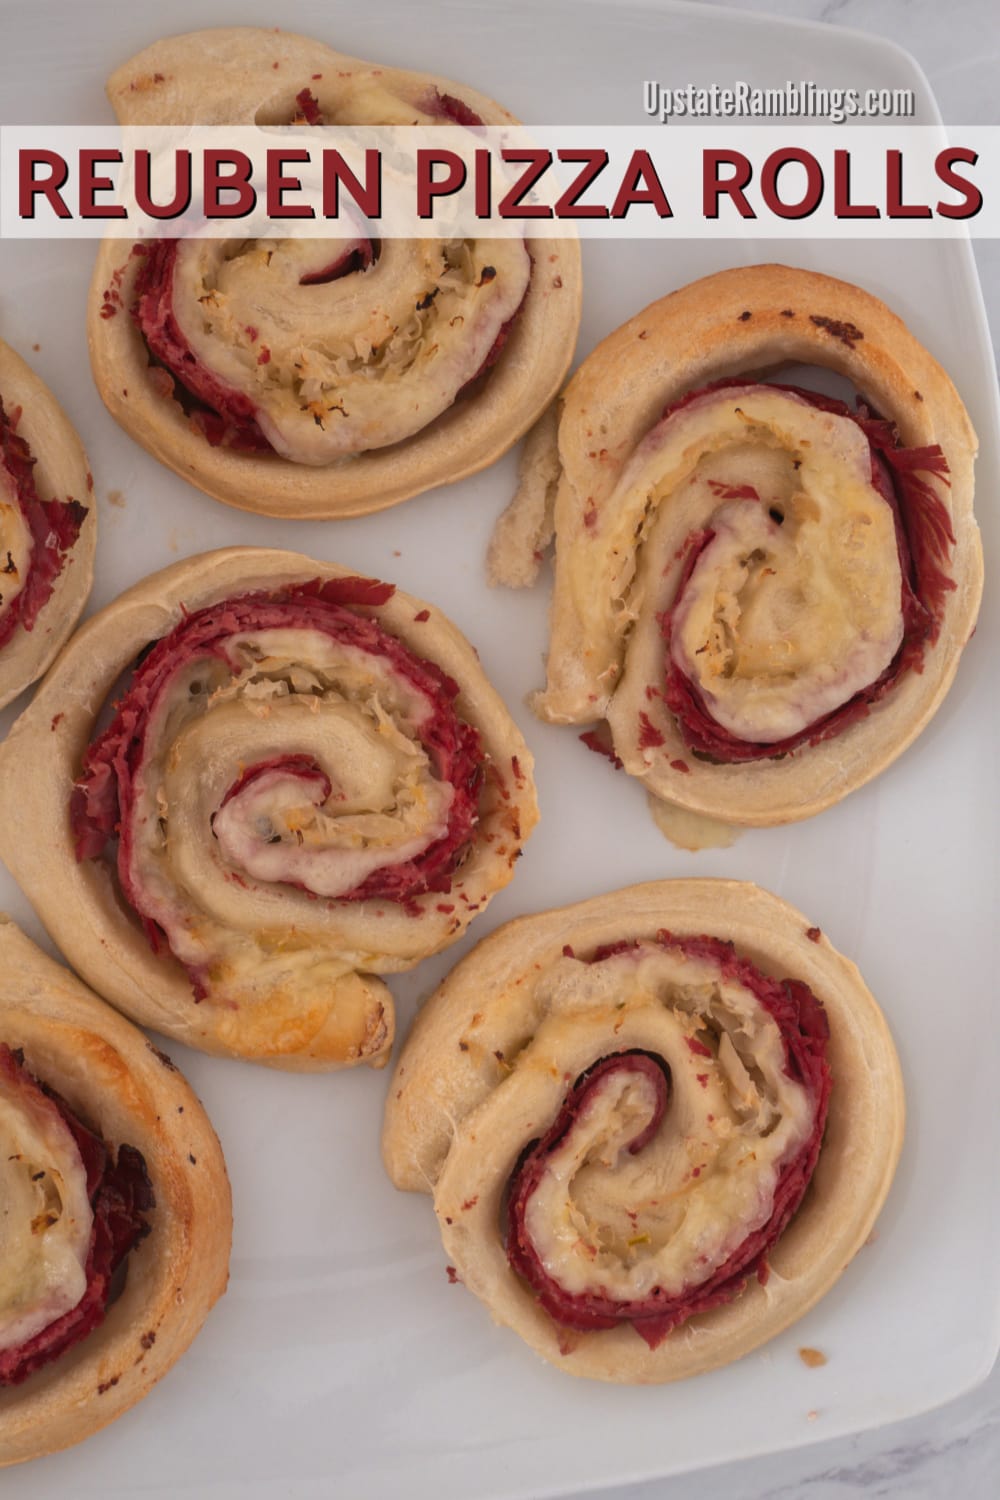 These Reuben Pizza Rolls are a quick and easy Irish inspired recipe in which corned beef, Swiss cheese and sauerkraut are rolled up inside pizza dough for a St. Patrick's Day twist! This simple five ingredient recipe is ready to eat in less than 30 minutes. #reuben #pizzaroll